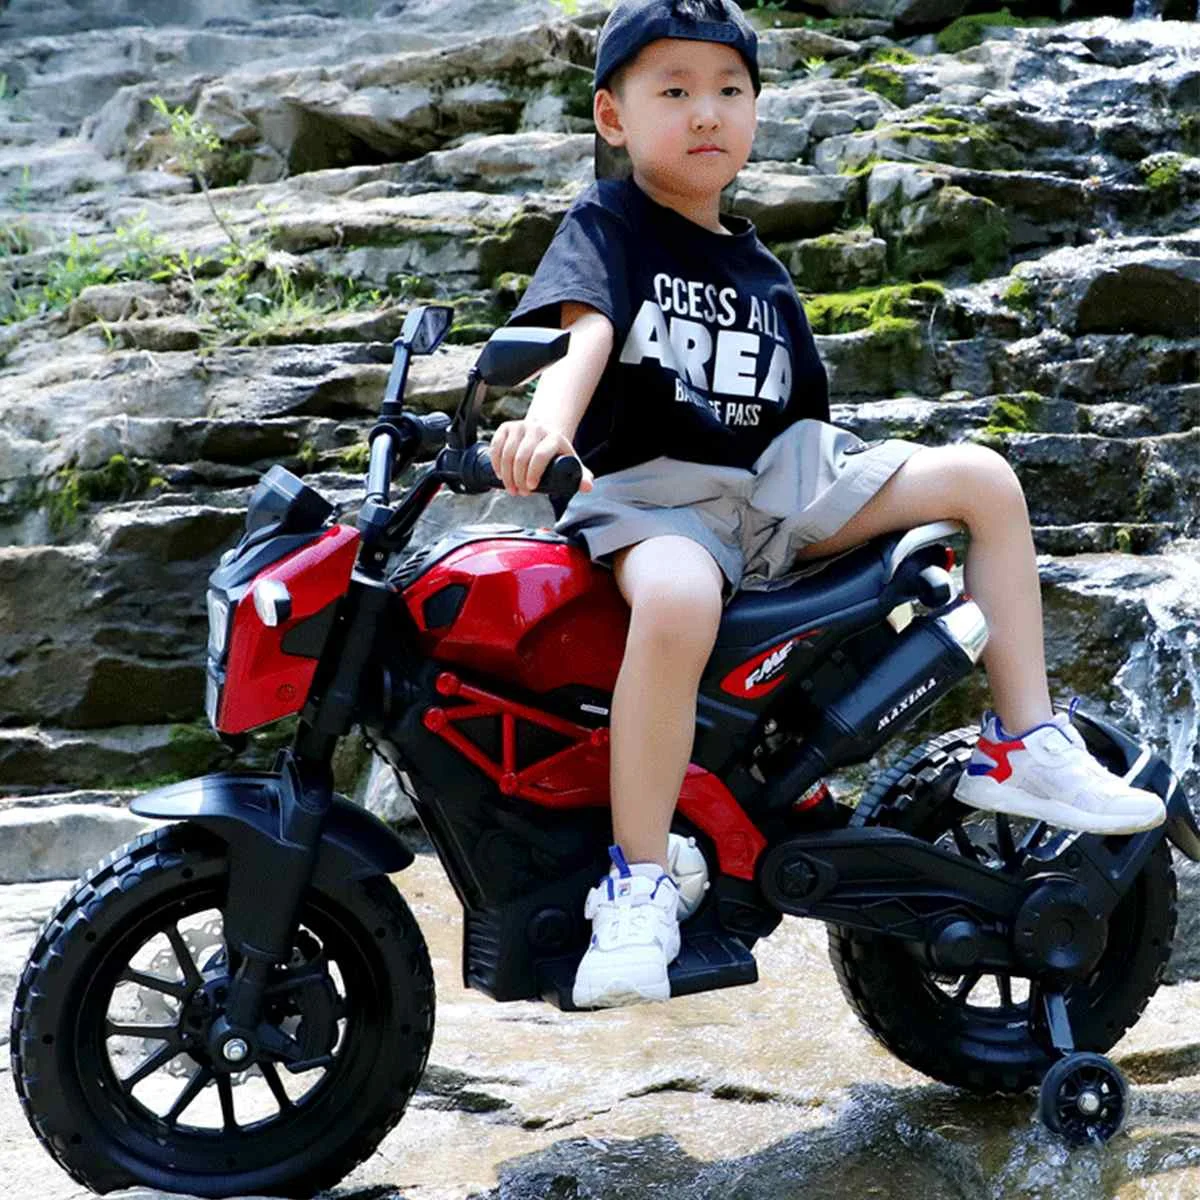 12V Children's Electric Car Kids Ride on Motorcycle with Training Wheel Battery Powered Electric Dirt Bike Toys for 3+ Year Old